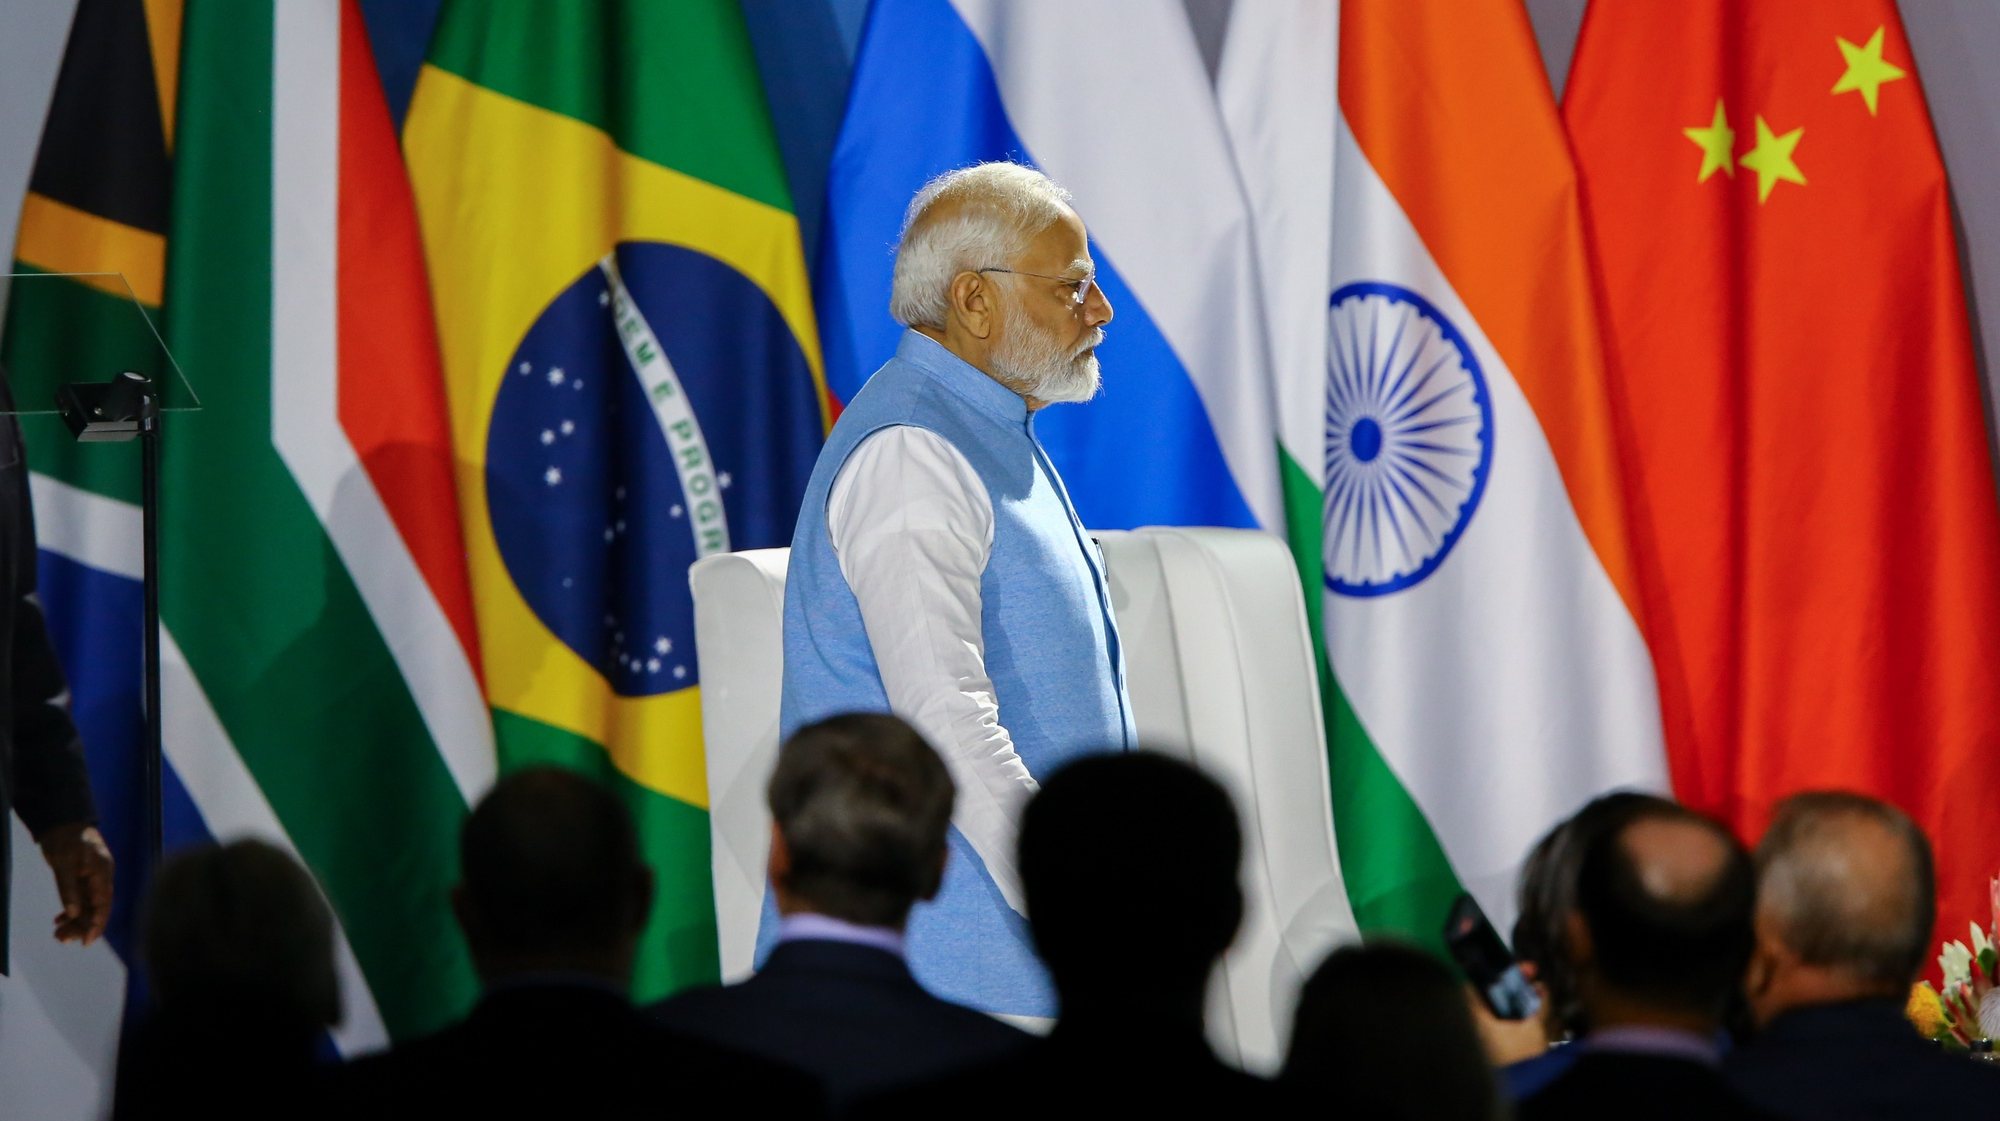 epaselect epa10813731 Prime Minister of India Narendra Modi attends the 15th BRICS Summit, in Johannesburg, South Africa, 22 August 2023. South Africa is hosting the 15th BRICS Summit, (Brazil, Russia, India, China and South Africa), as the groupâ€™s economies account for a quarter of global gross domestic product. Dozens of leaders of other countries in Africa, Asia and the Middle East are also attending the summit.  EPA/KIM LUDBROOK